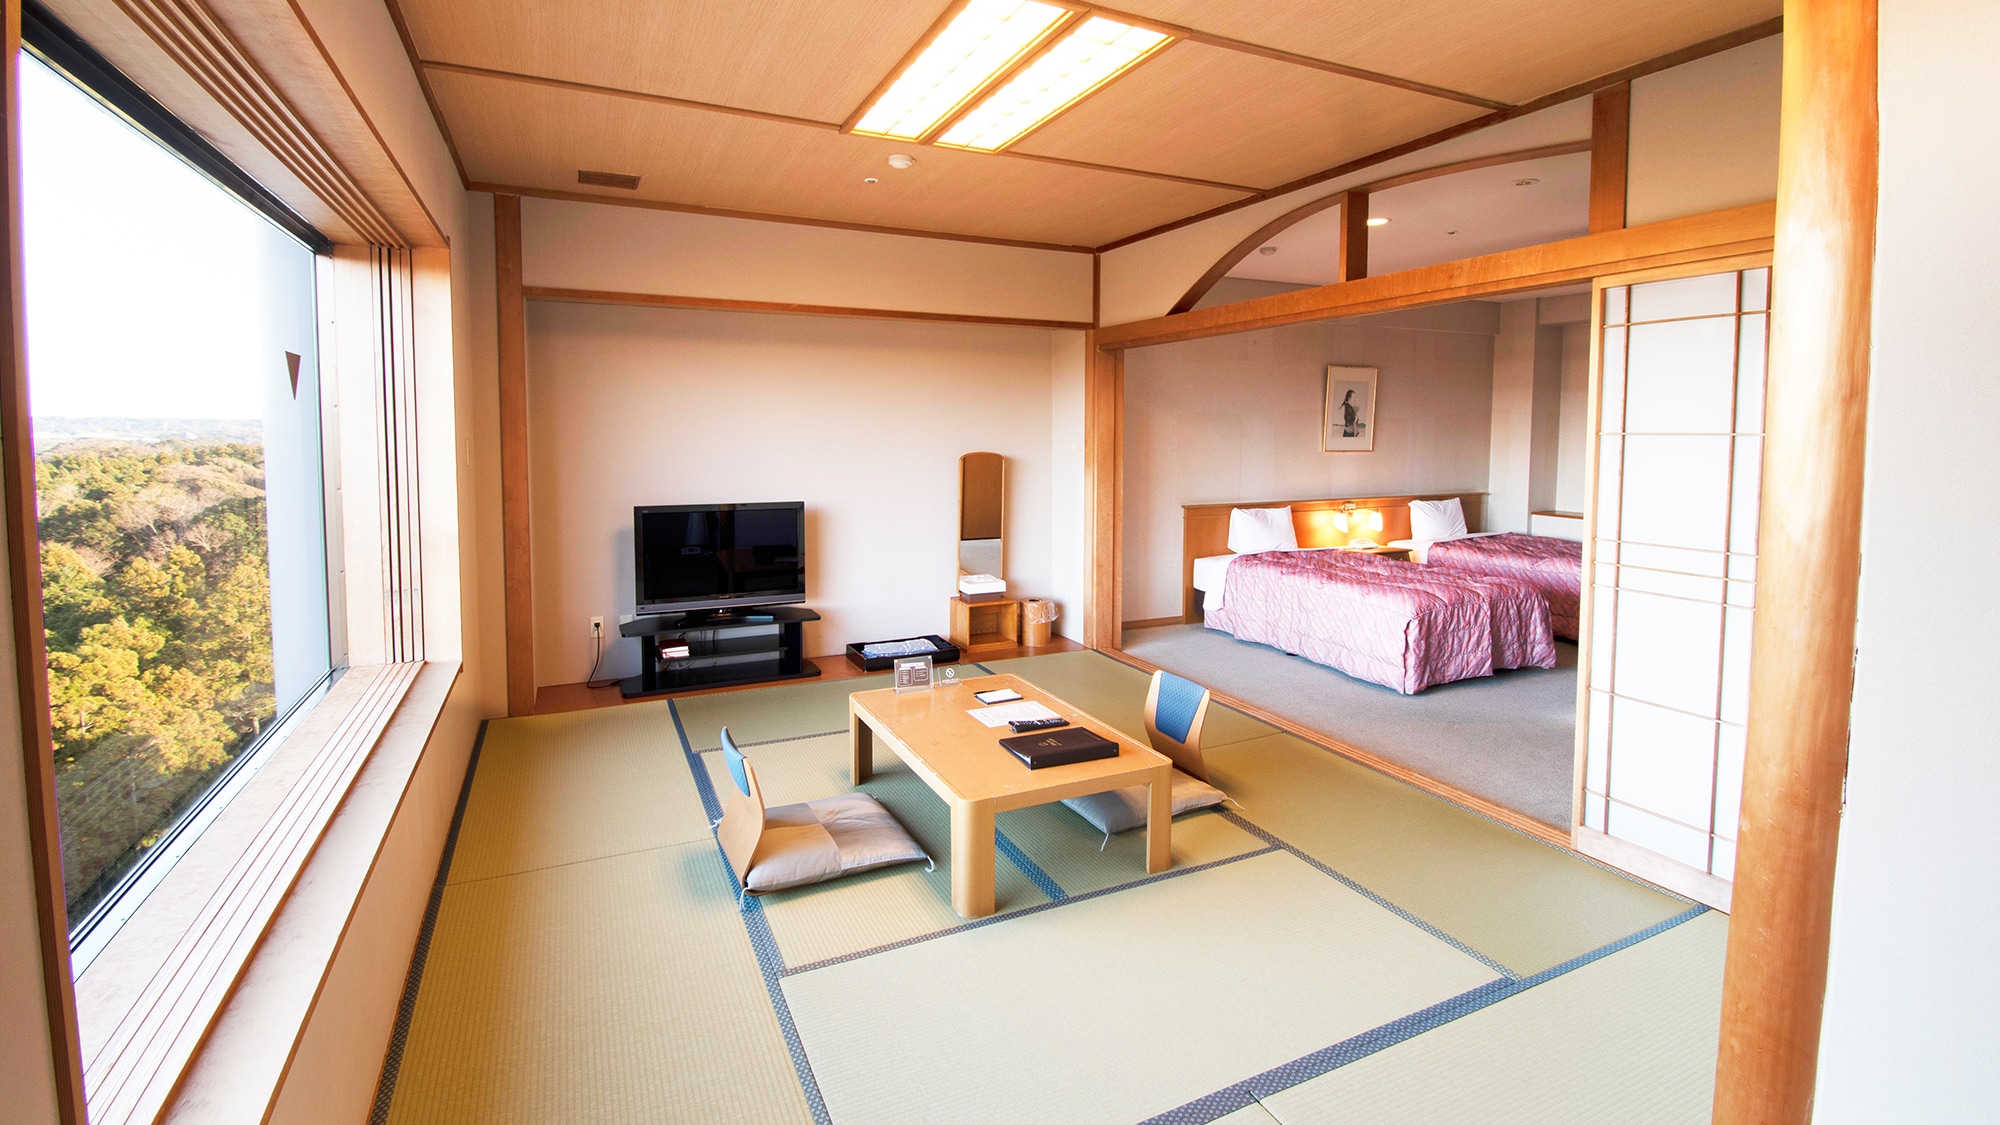 ◆ Japanese and Western room [North Wing] 52.3 square meters